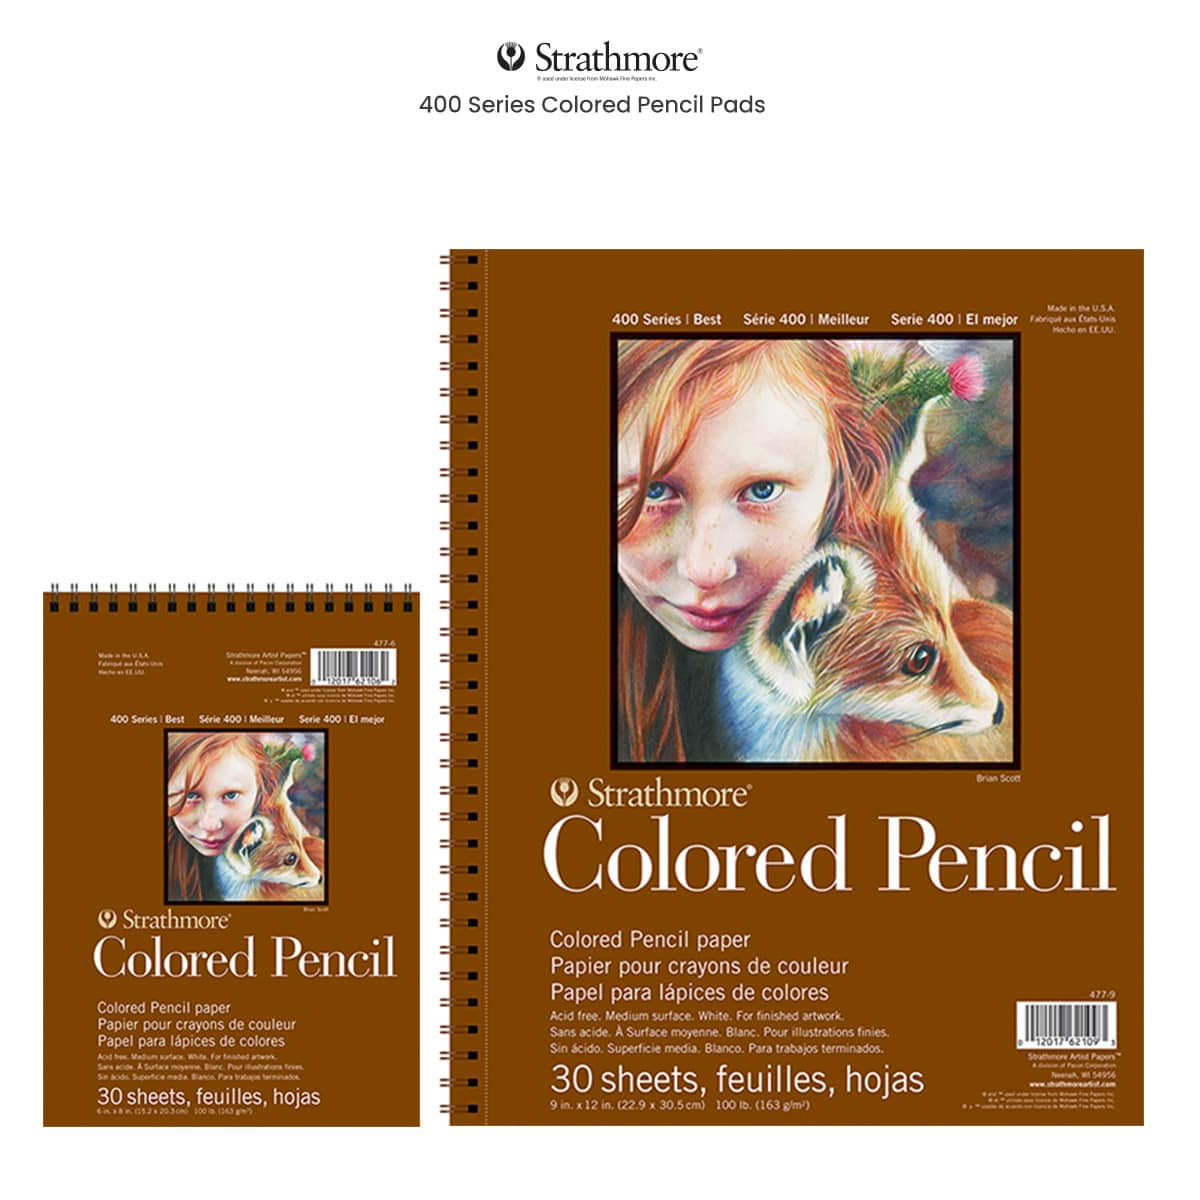 Strathmore 400 Series Colored Pencil Pads